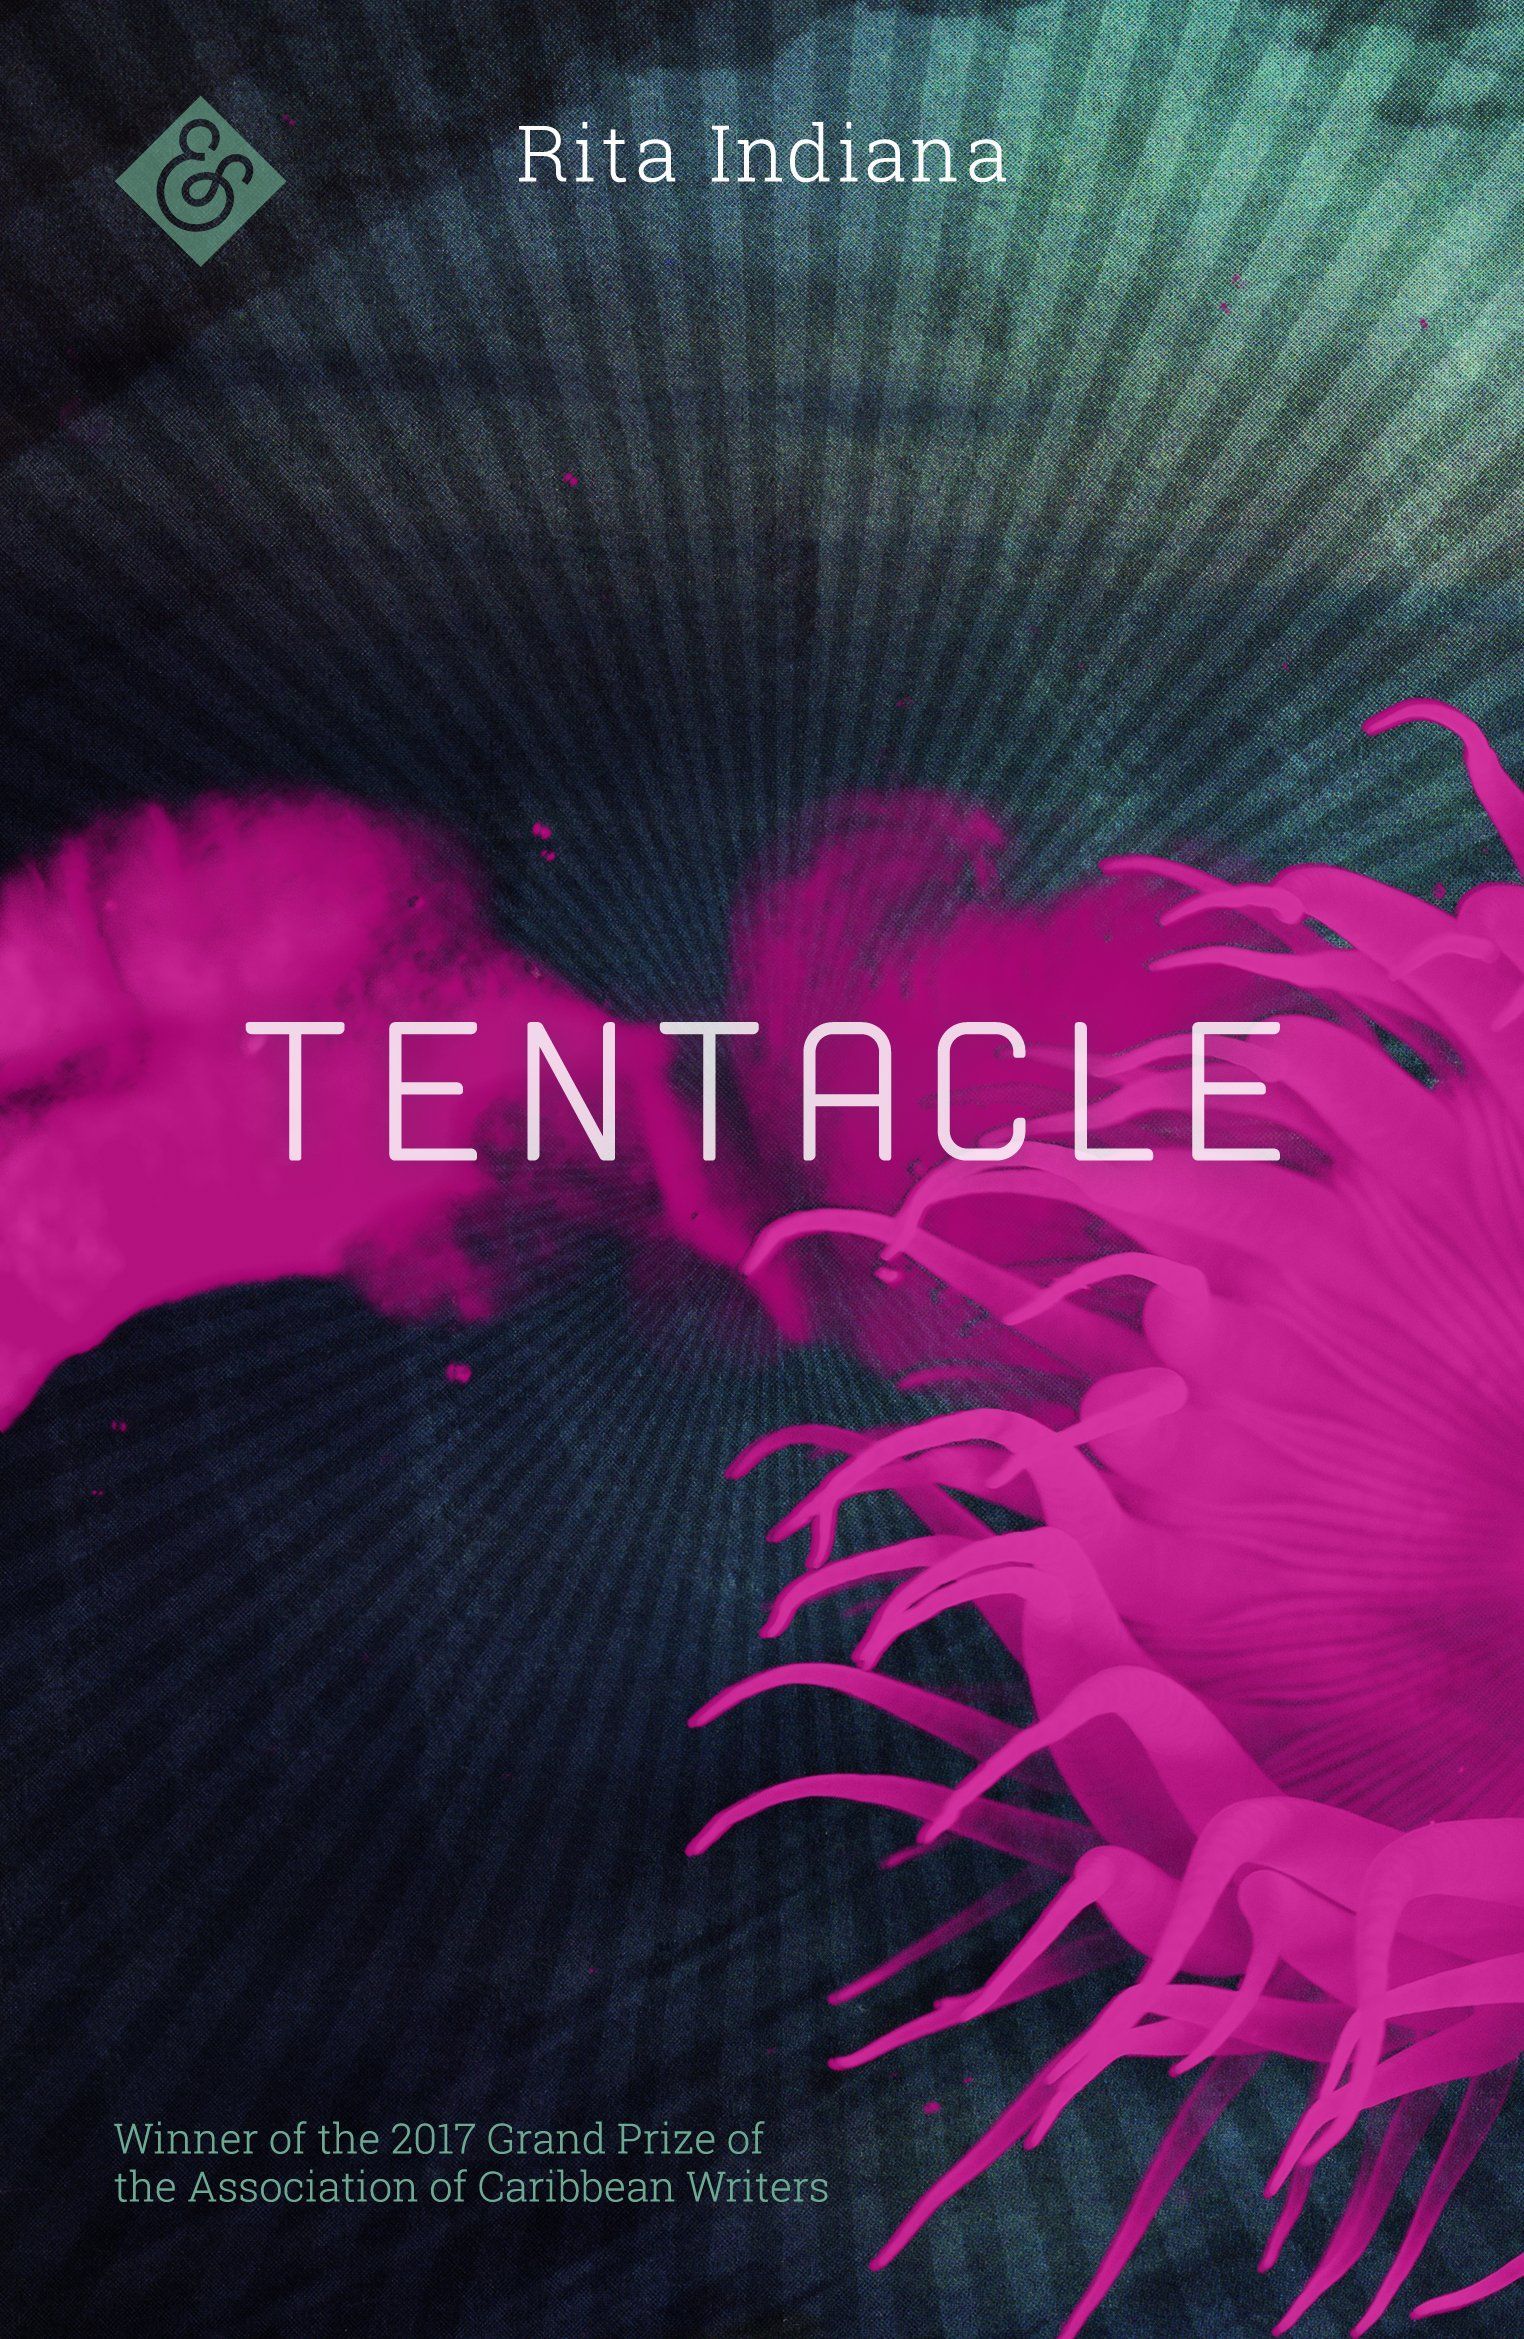 Little Book with Big Ambitions: Rita Indiana’s “Tentacle”